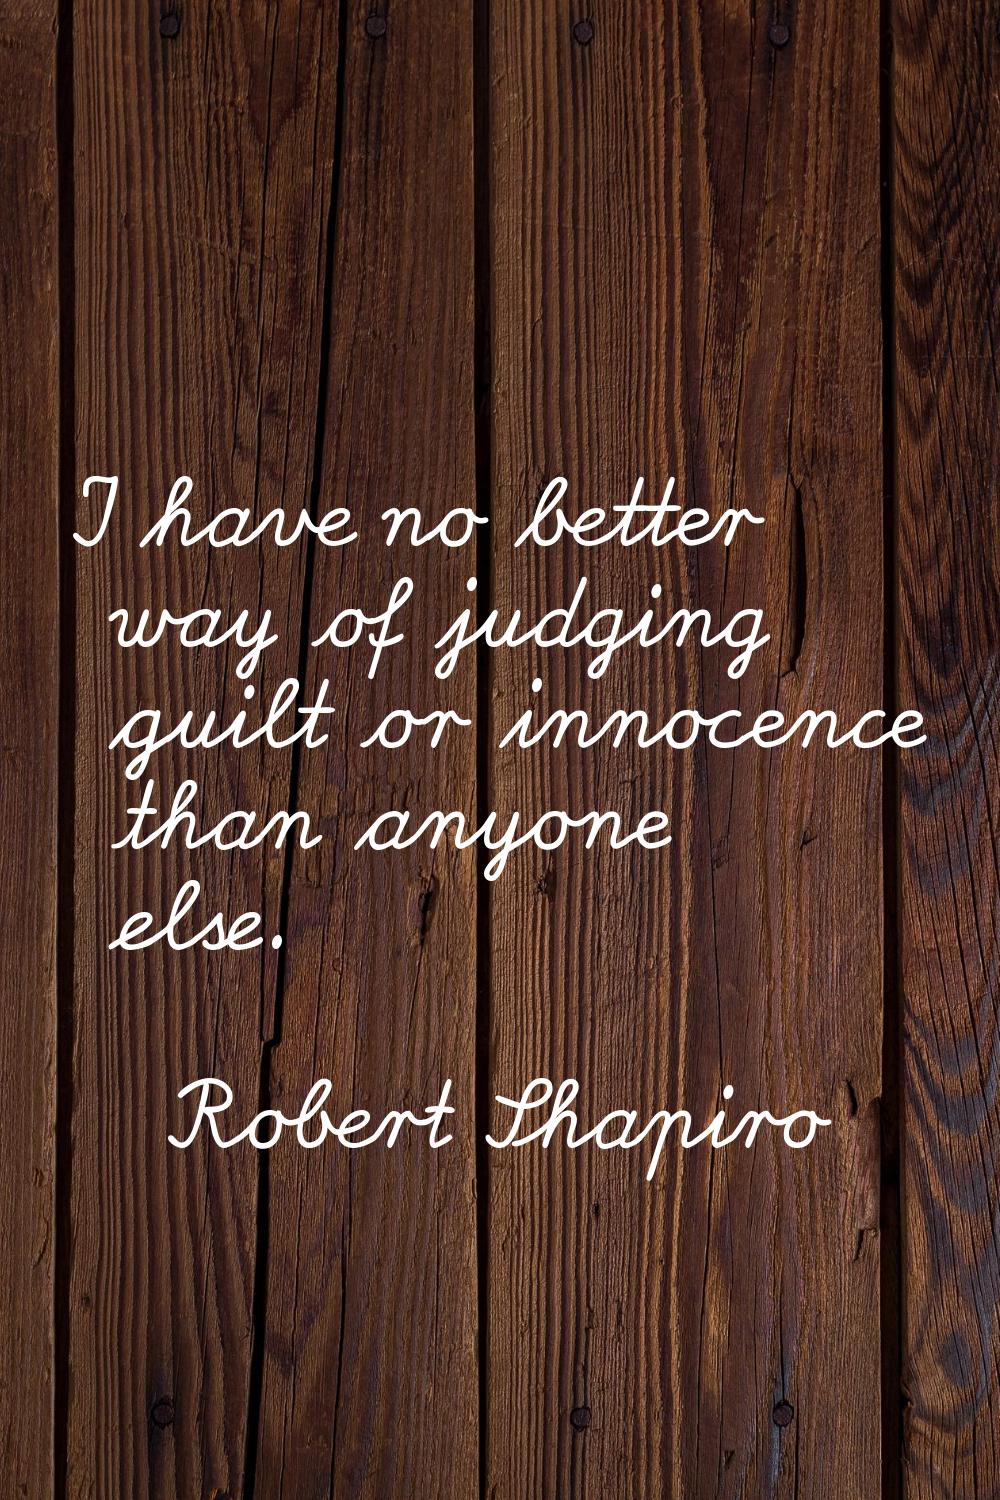 I have no better way of judging guilt or innocence than anyone else.